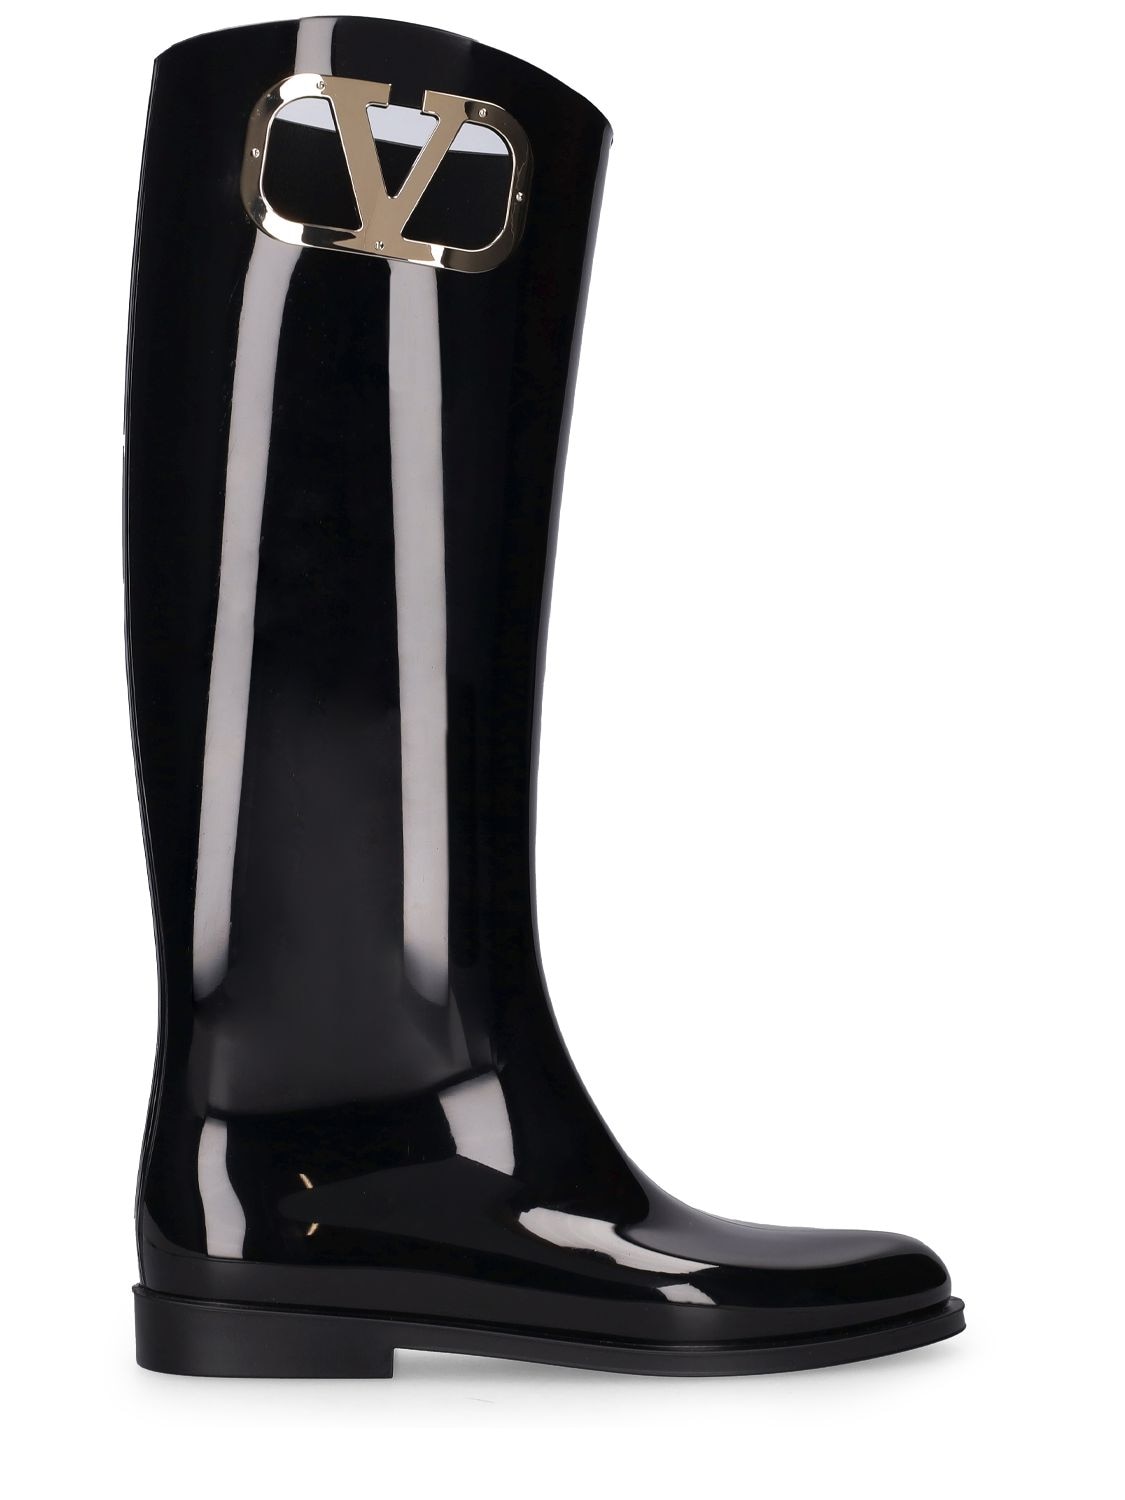 Image of 20mm Vlogo Pvc Tall Boots